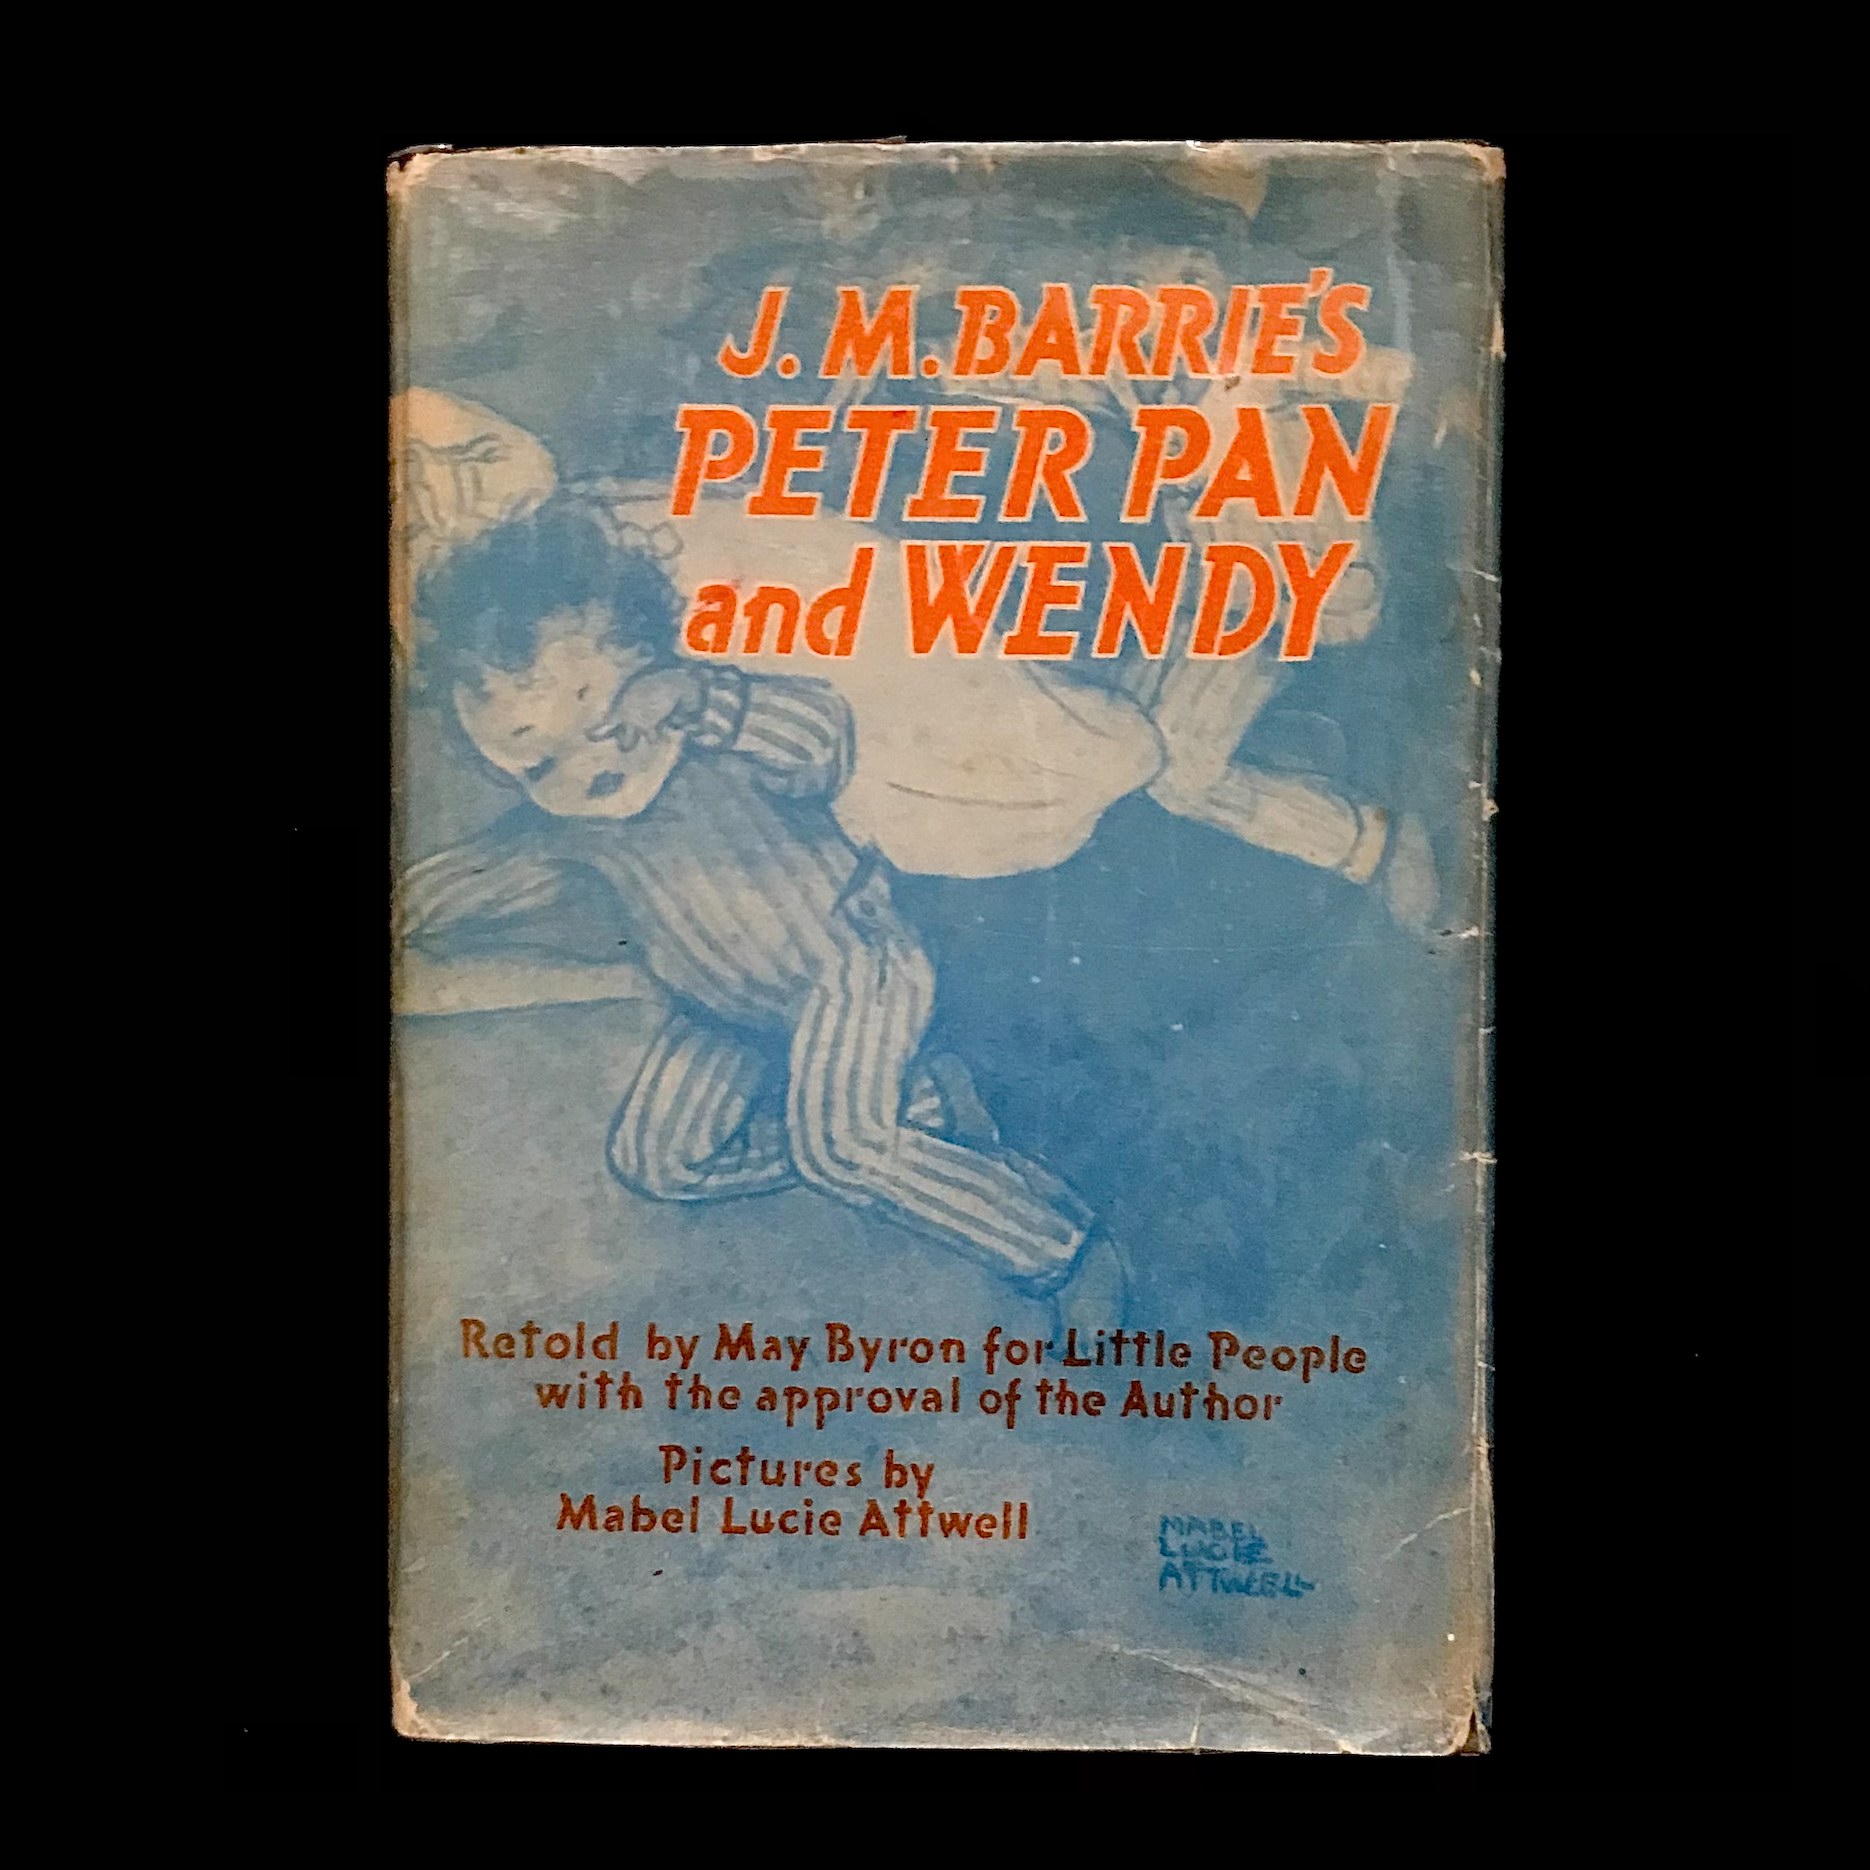 J. M. Barrie's Peter Pan & Wendy Retold by May Byron